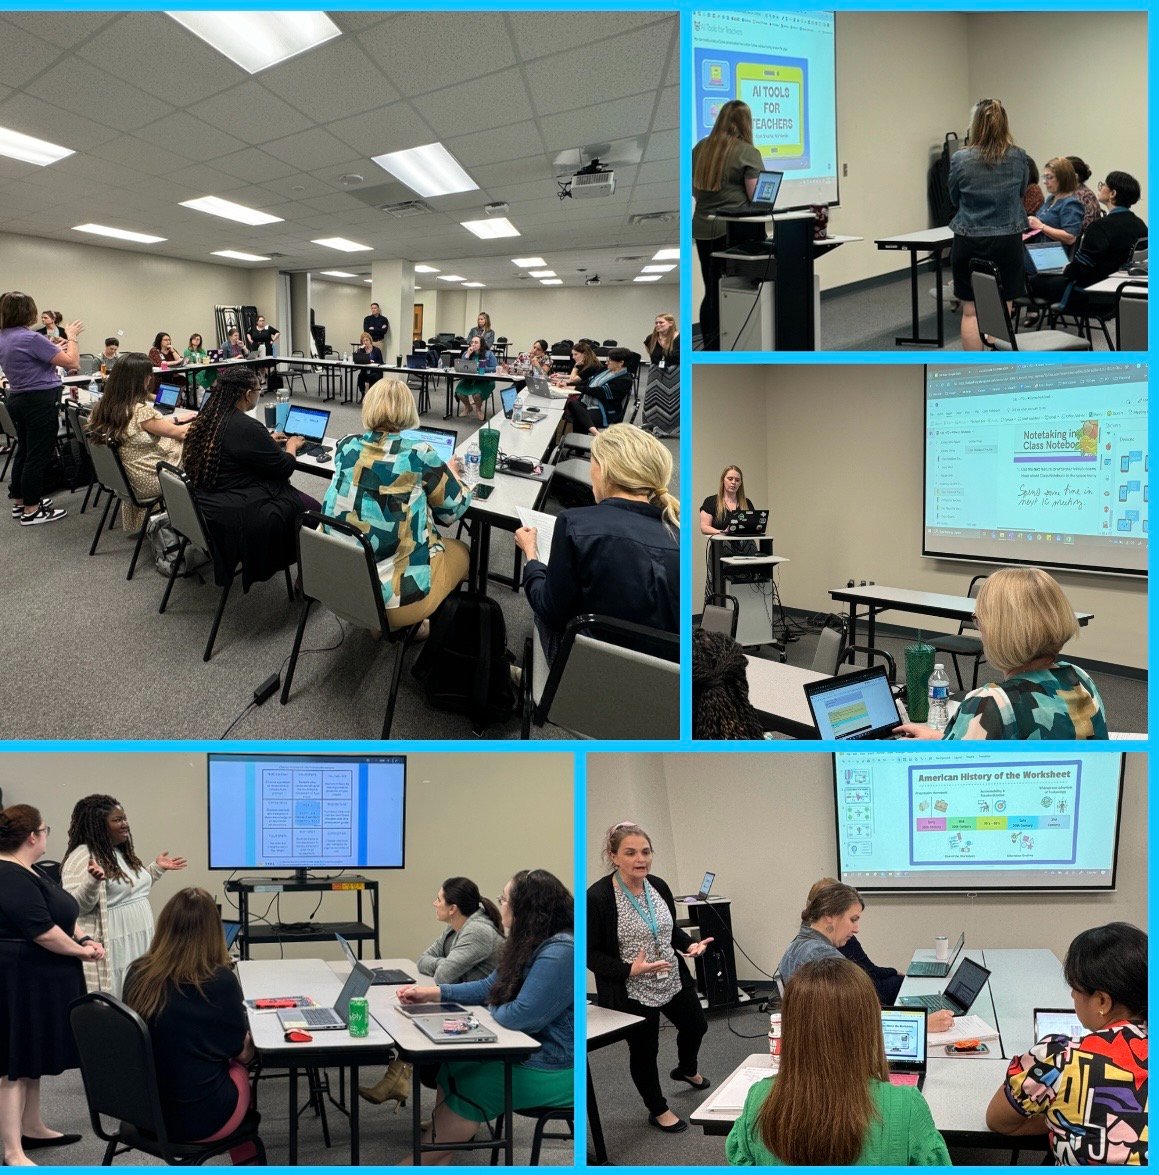 🤩@KatyISD is excited to launch its first 1:1 Initiative in grades 3-12, next school year. The C&I and ITD departments met yesterday to explore ways to incorporate technology across all subjects. We cannot wait for future collaborations! 💻🚀#Teamwork #TeachingWithTech #eVolve